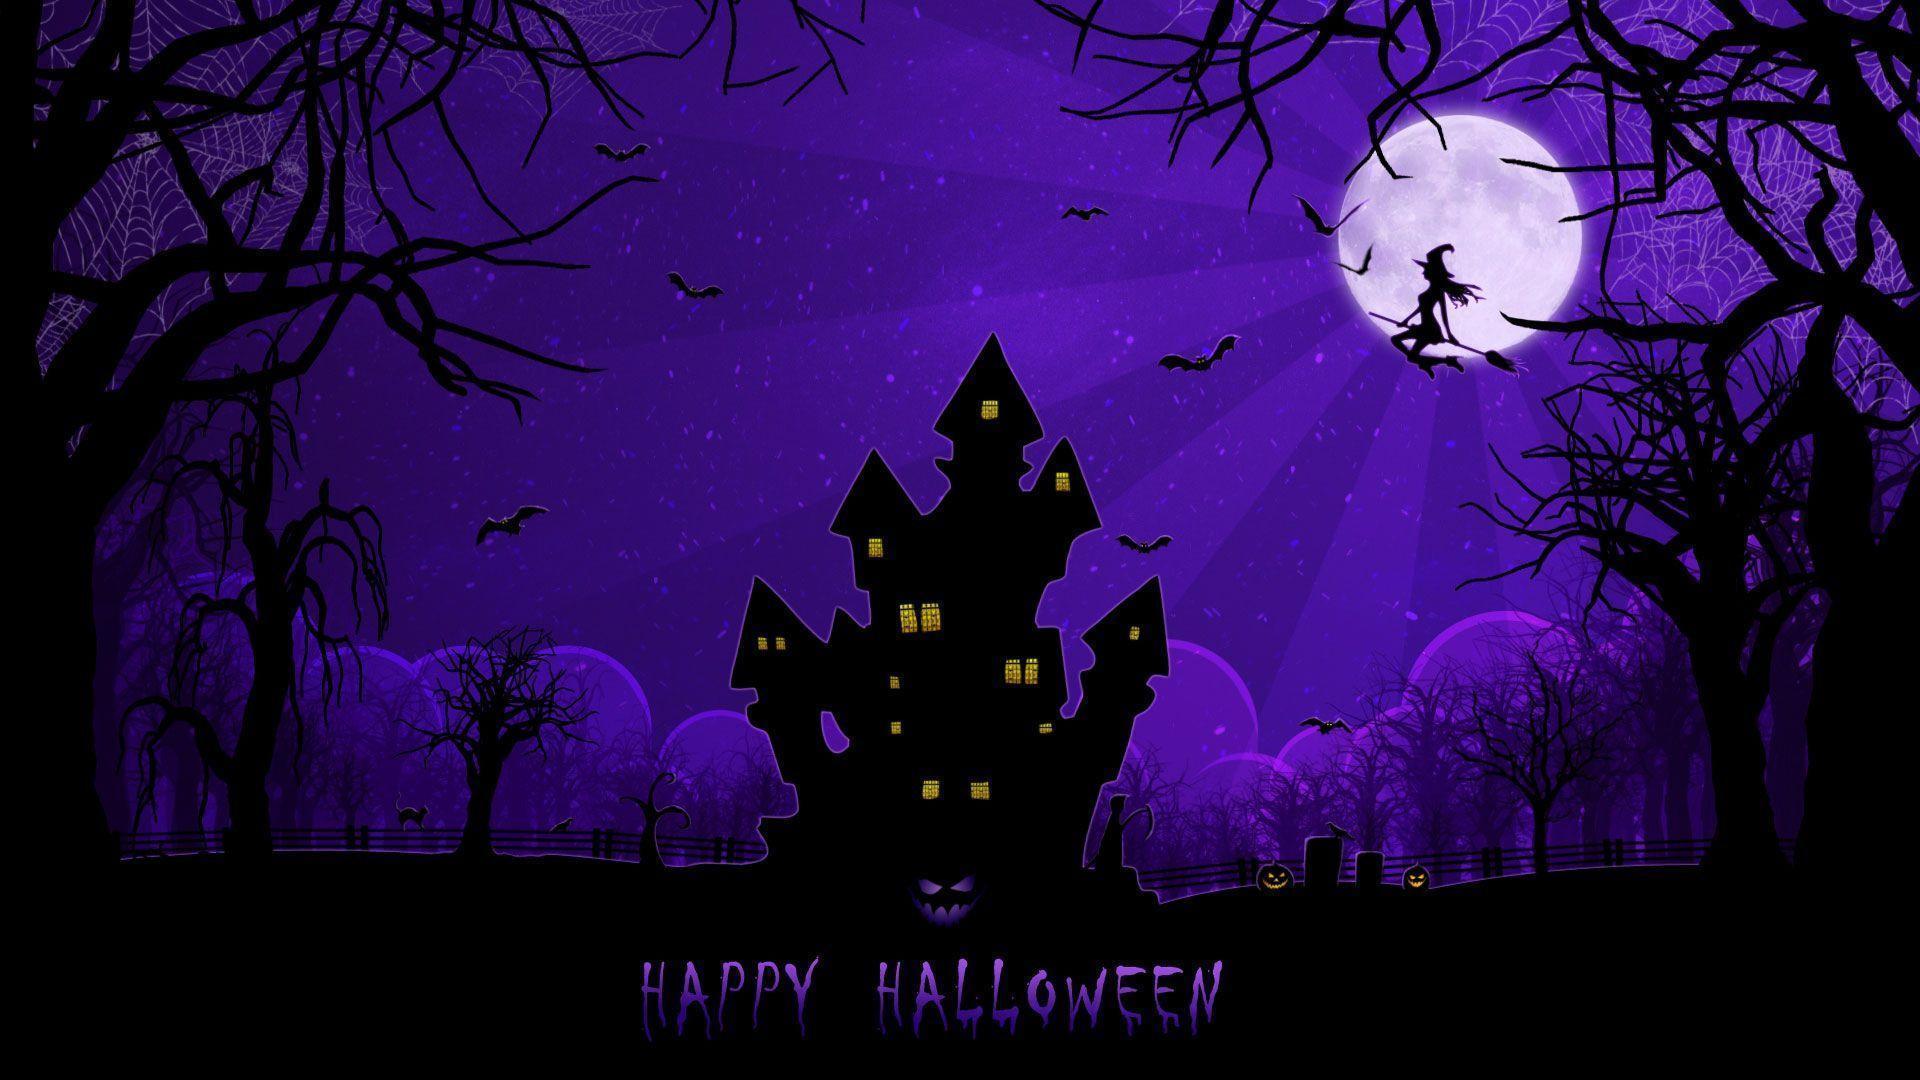 Free Scary Halloween Background & Wallpaper Collection 2014